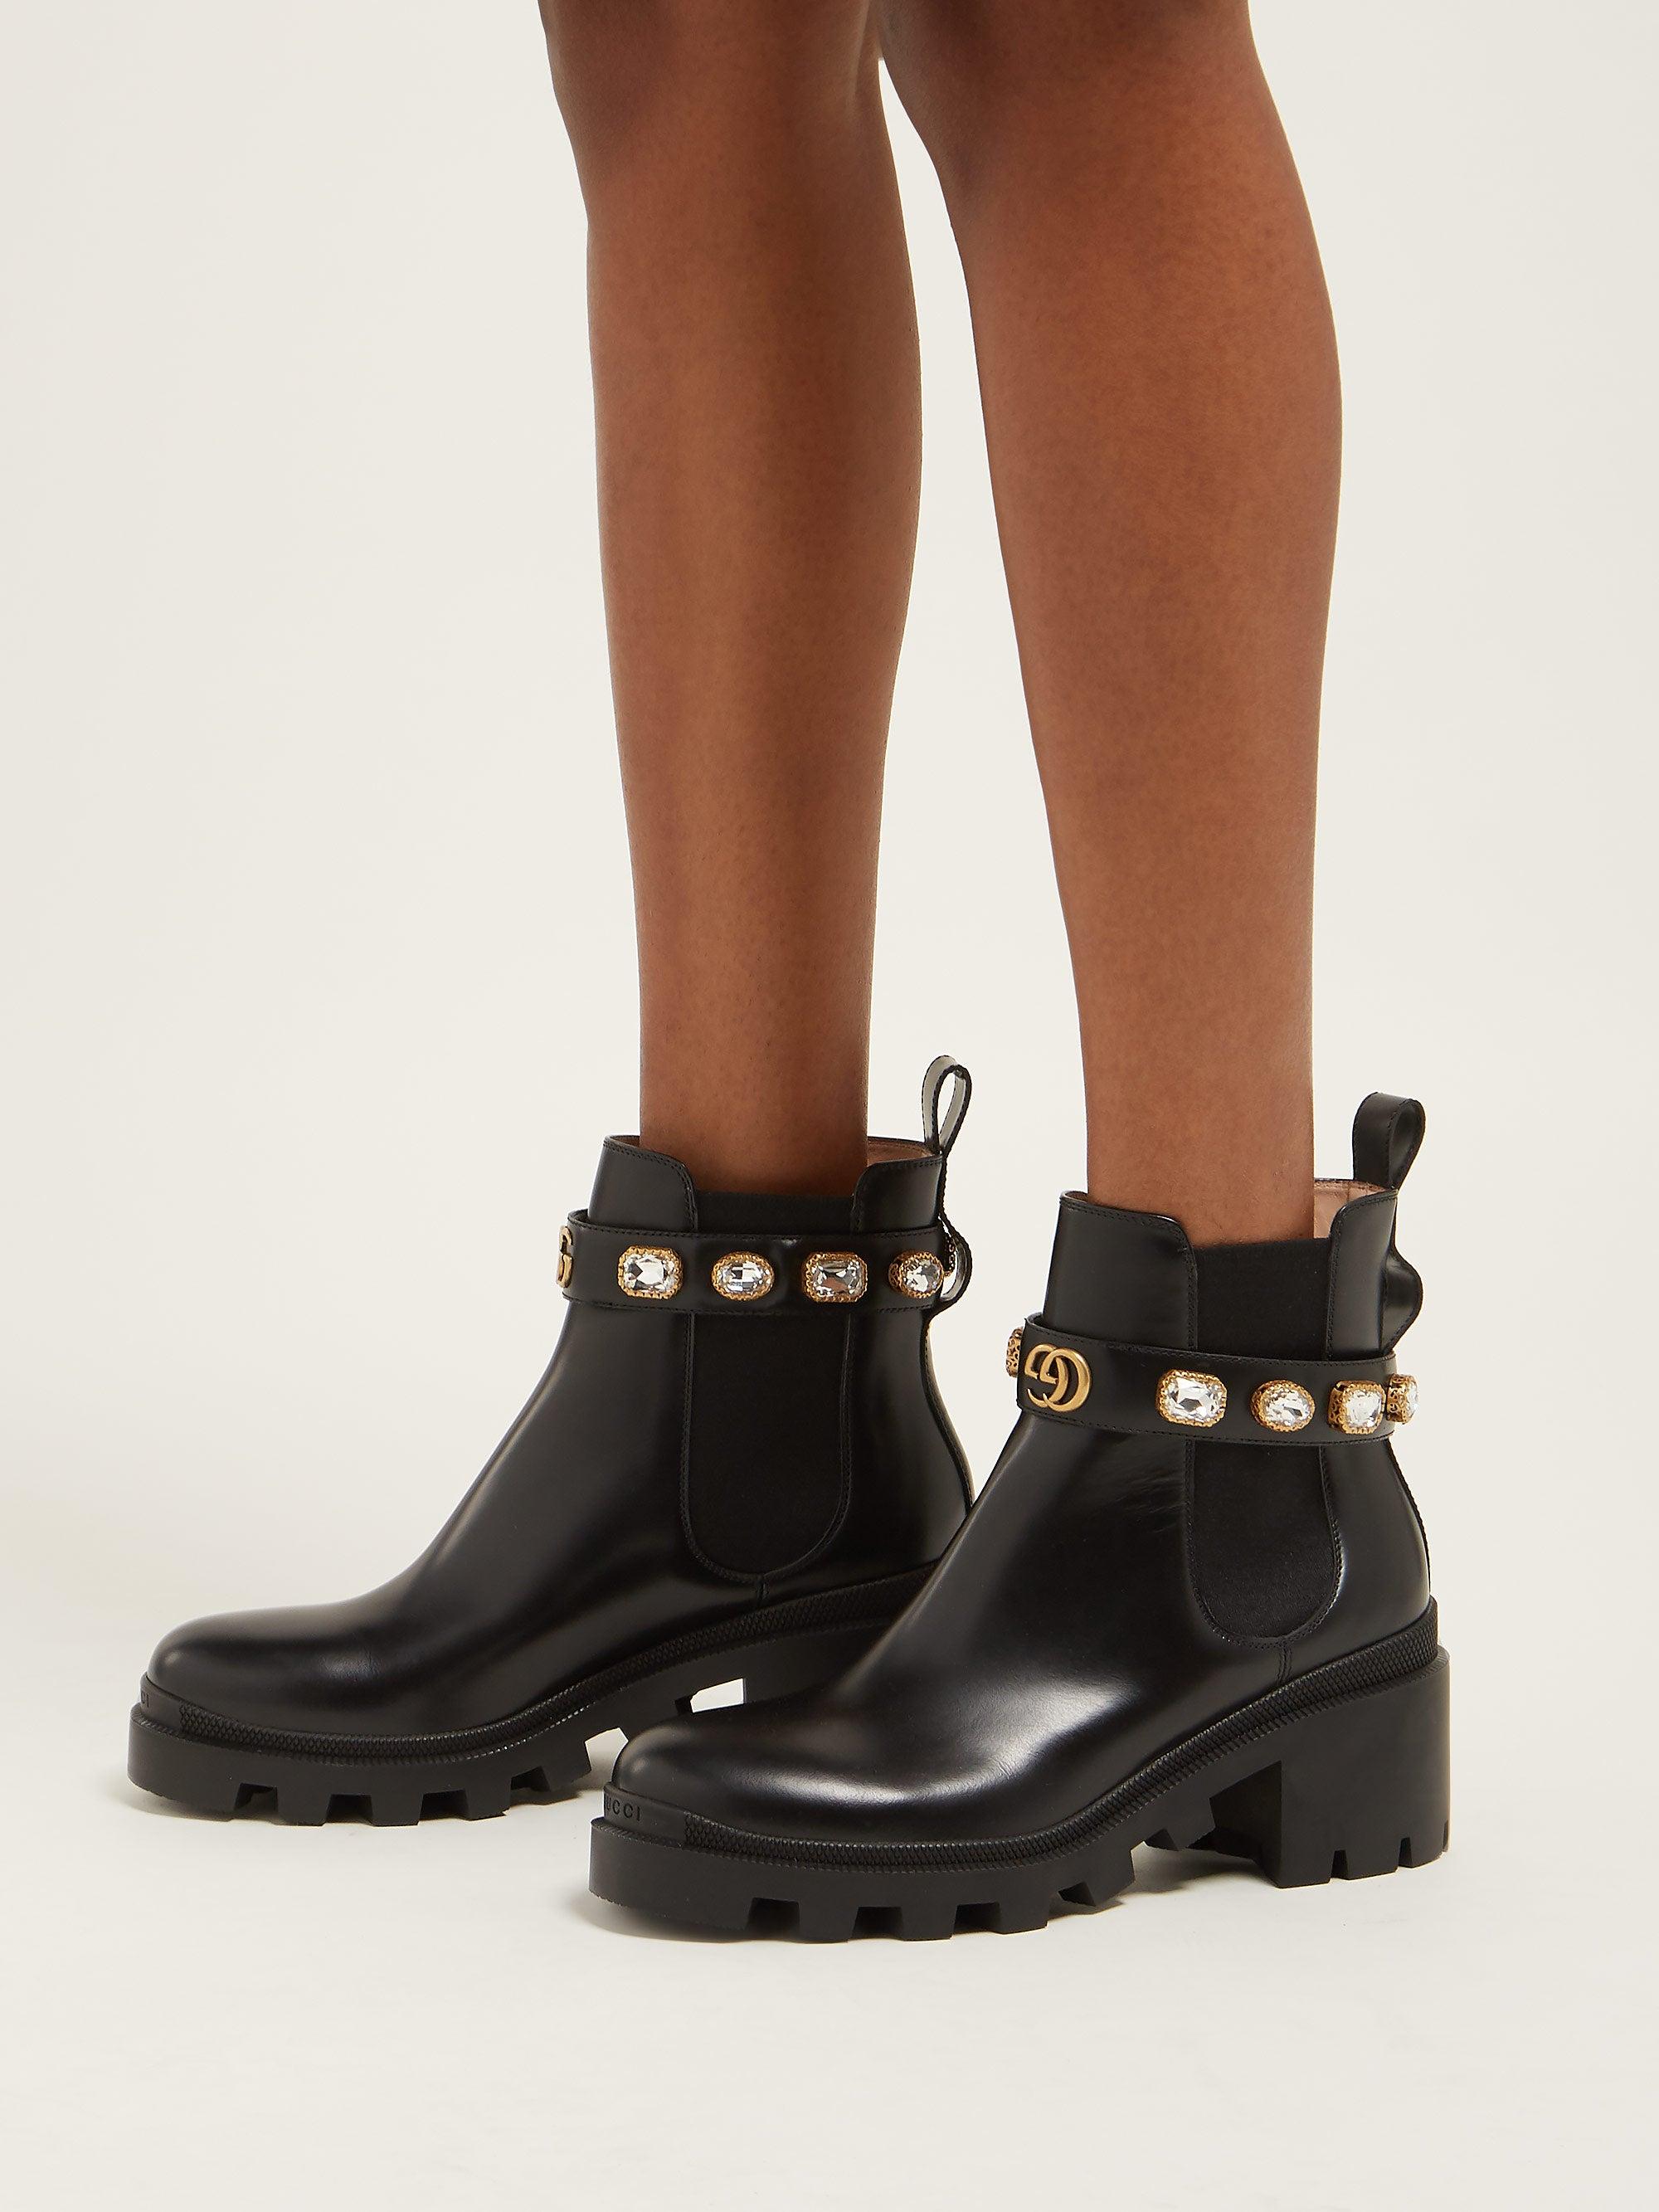 bottines serpent gucci, super buy Save 69% available - simourdesign.com